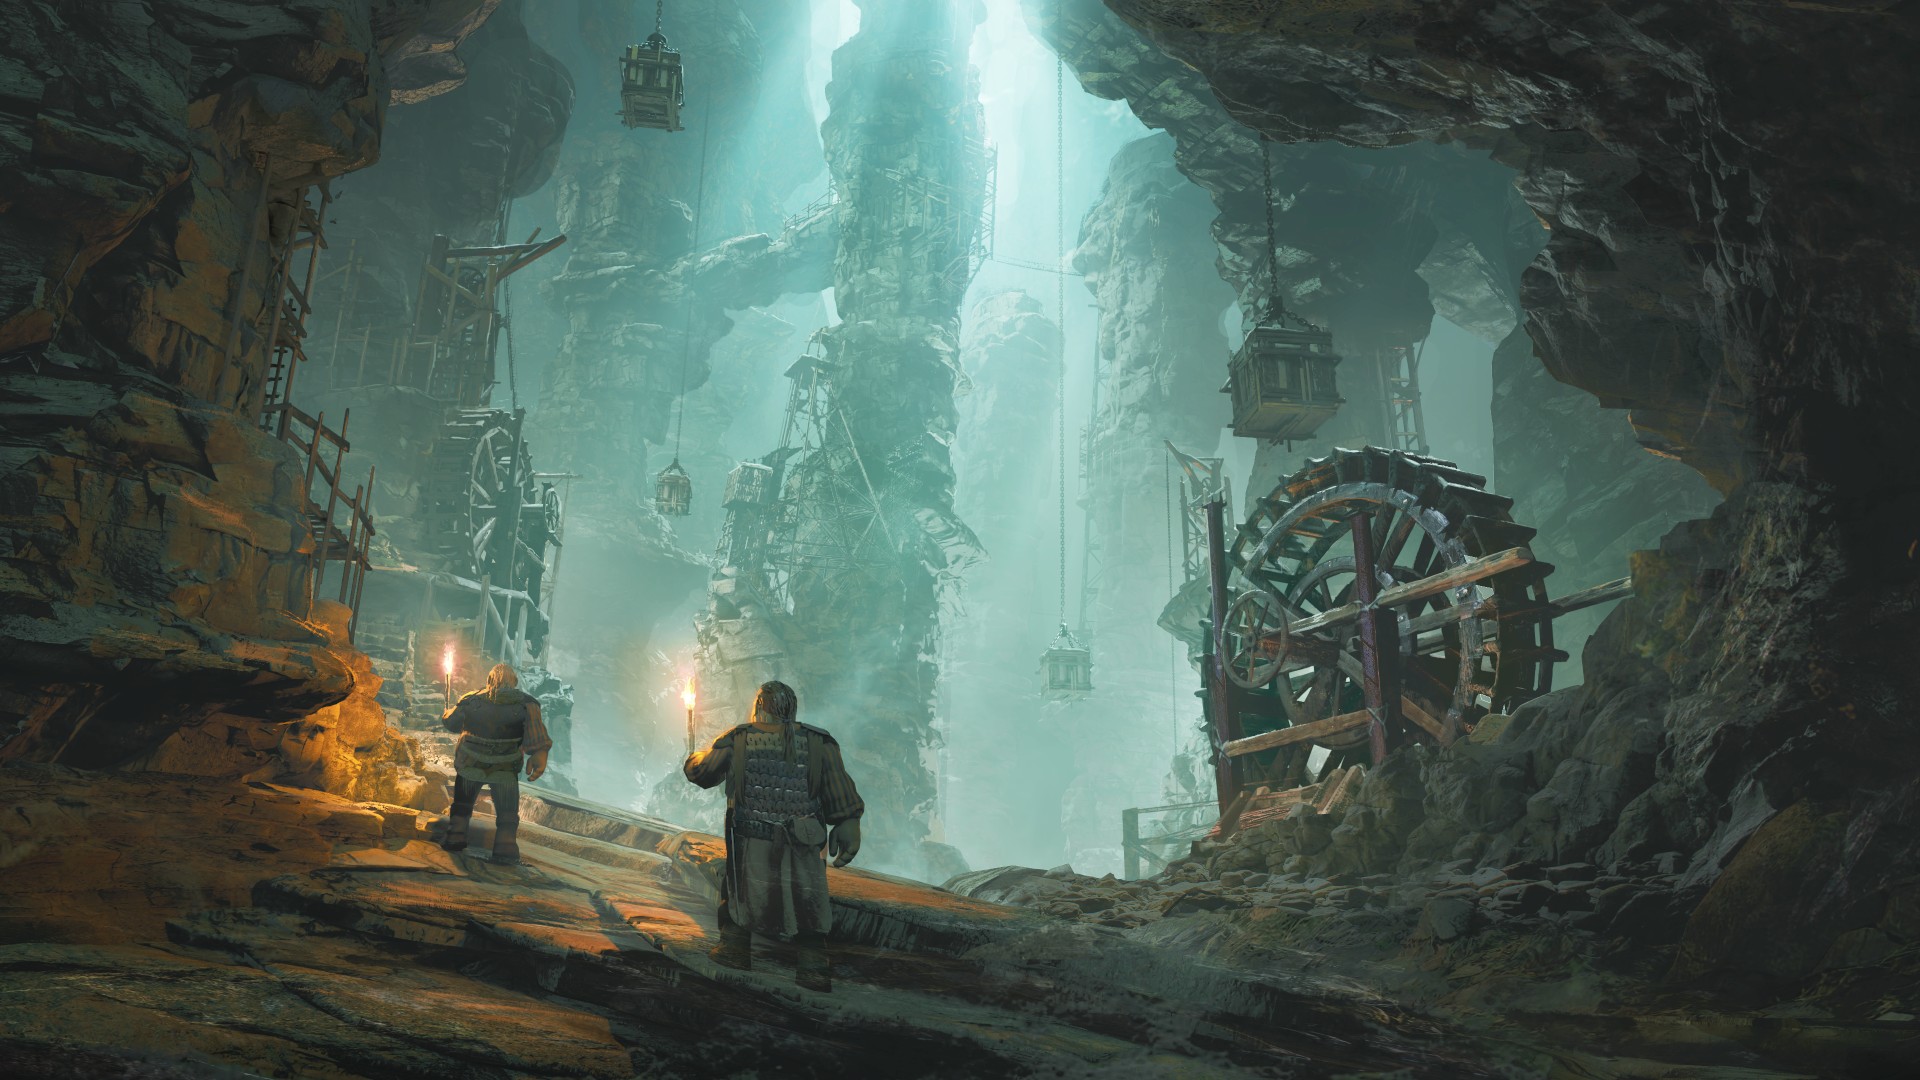 Lord of the Rings Return to Moria Gollum: Dwarves exploring a cave in survival game LOTR Return to Moria